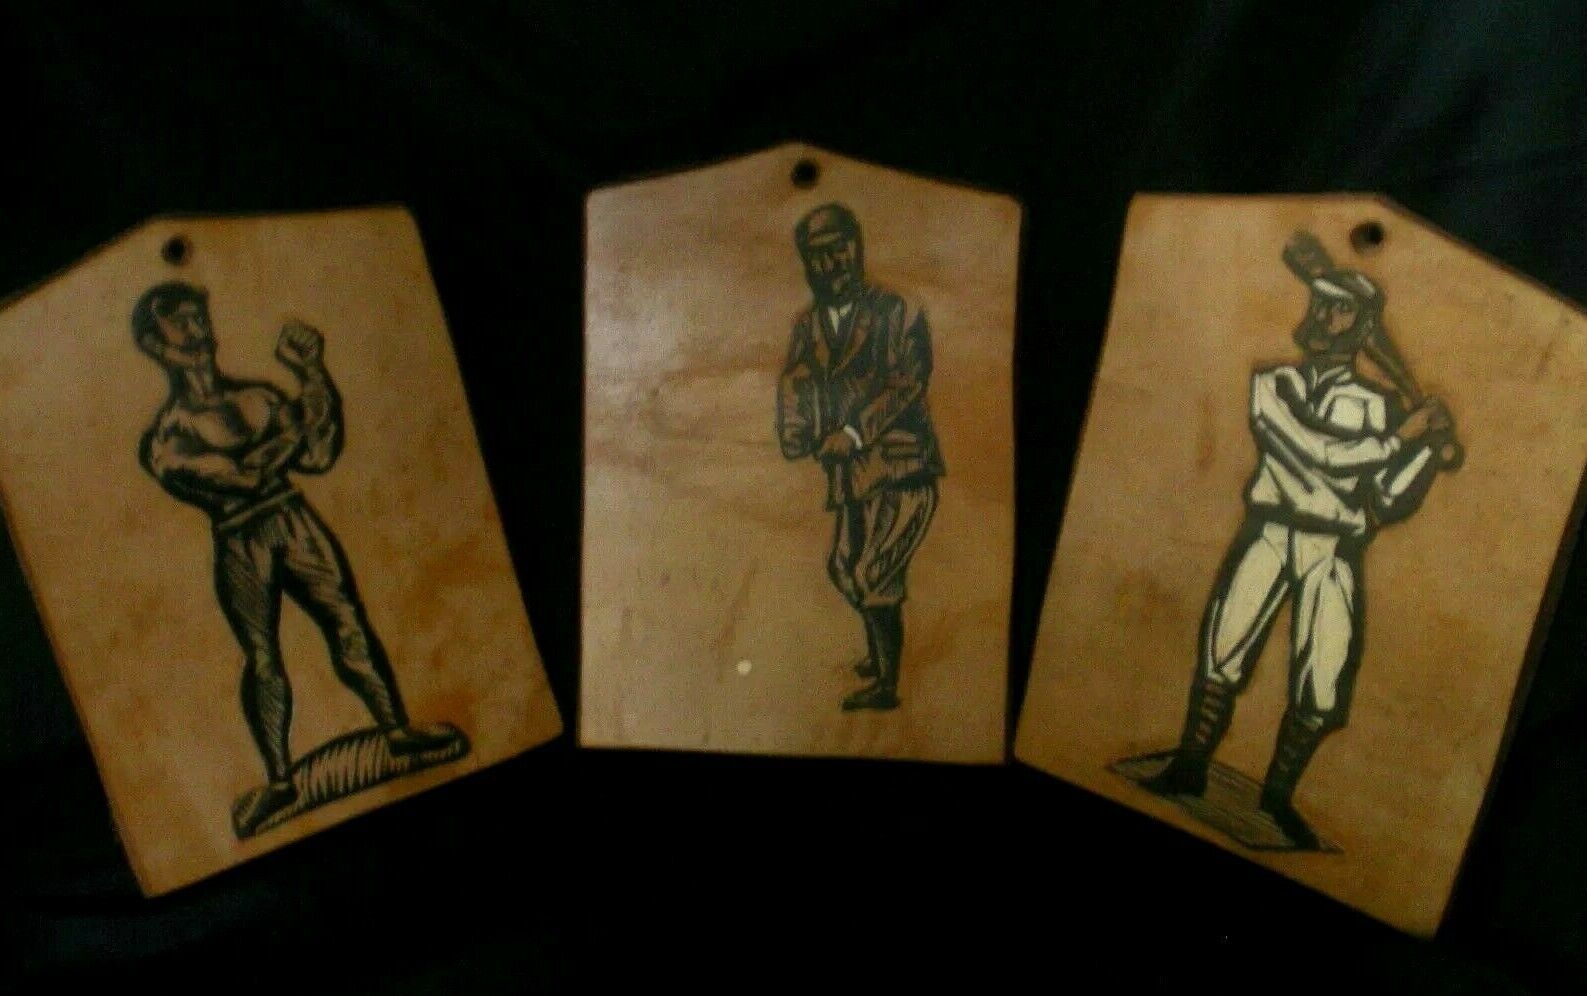 3 VINTAGE  LITHOGRAPH  ON THICK LEATHER MATS  ART MEN GOLF BASEBALL  PICTURE